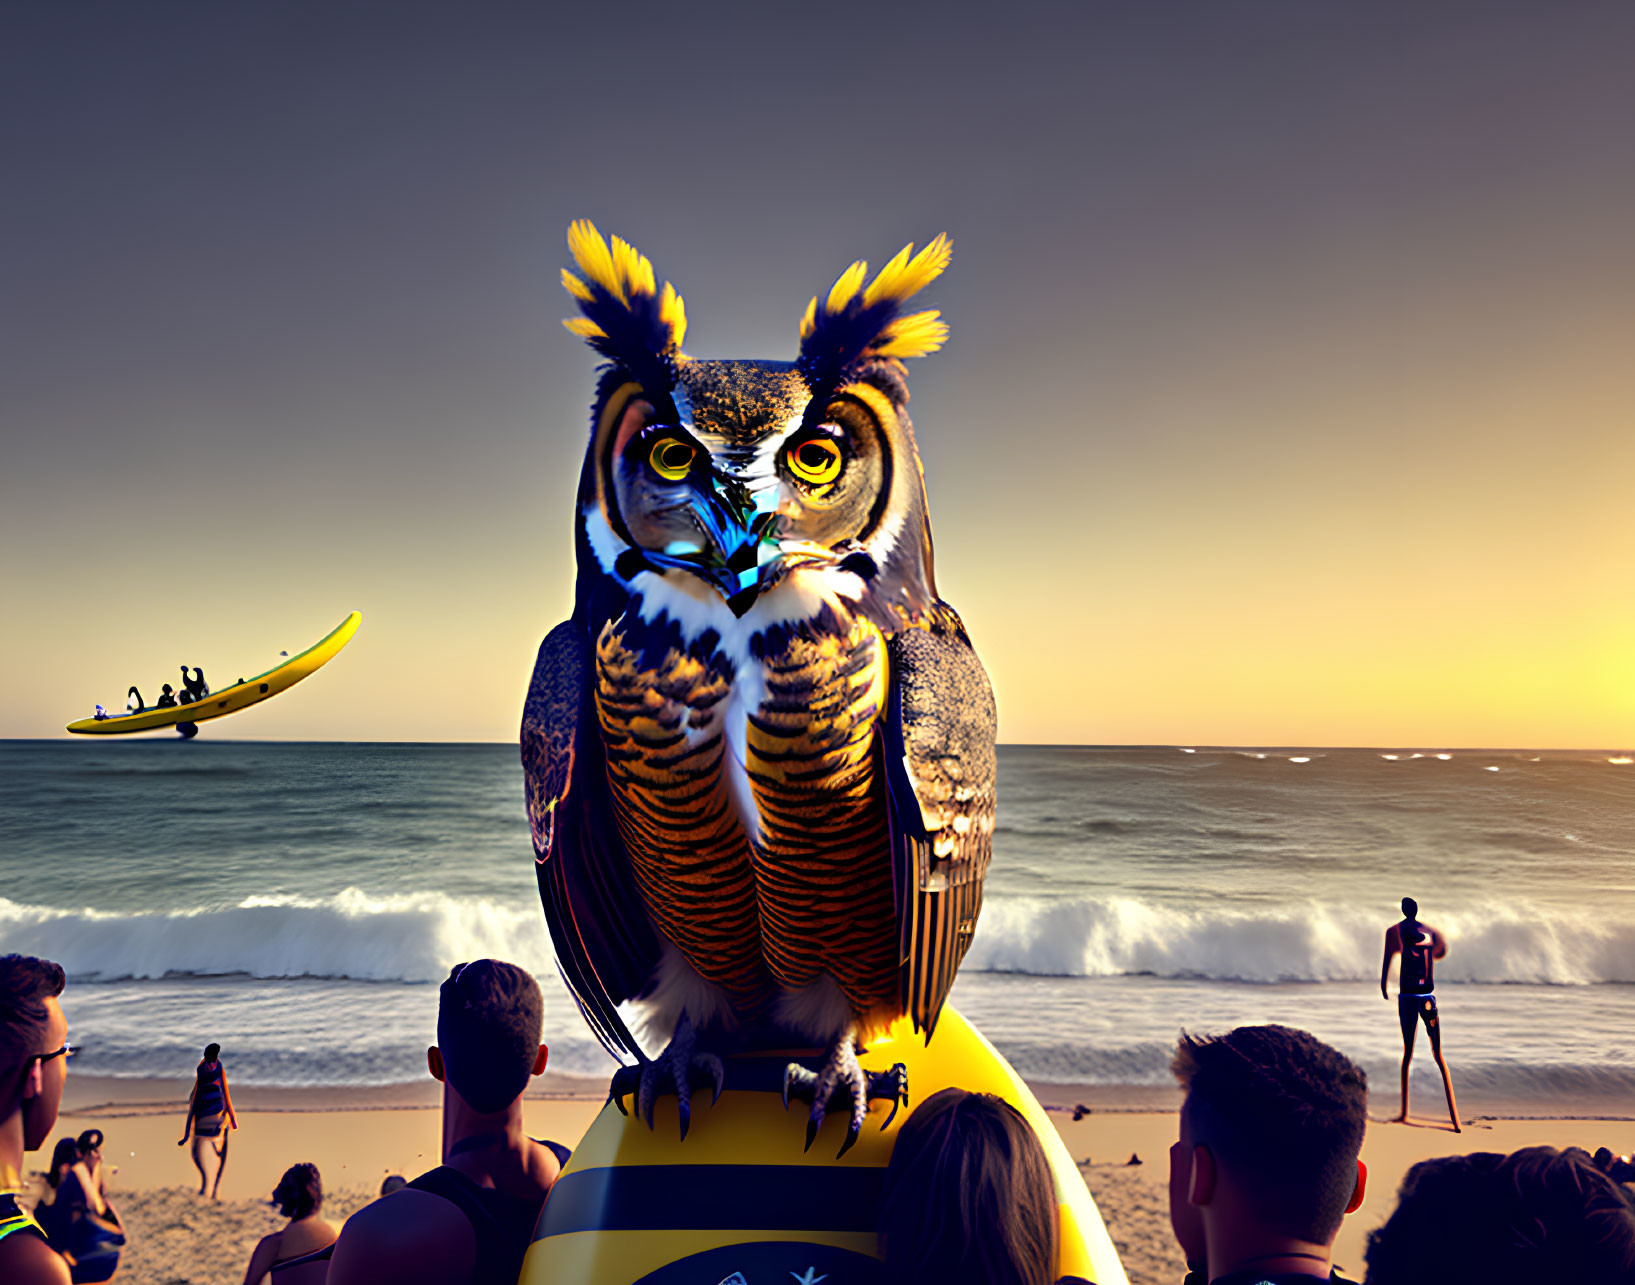 Owl on beach with people, lifeguard tower, boat at sunset